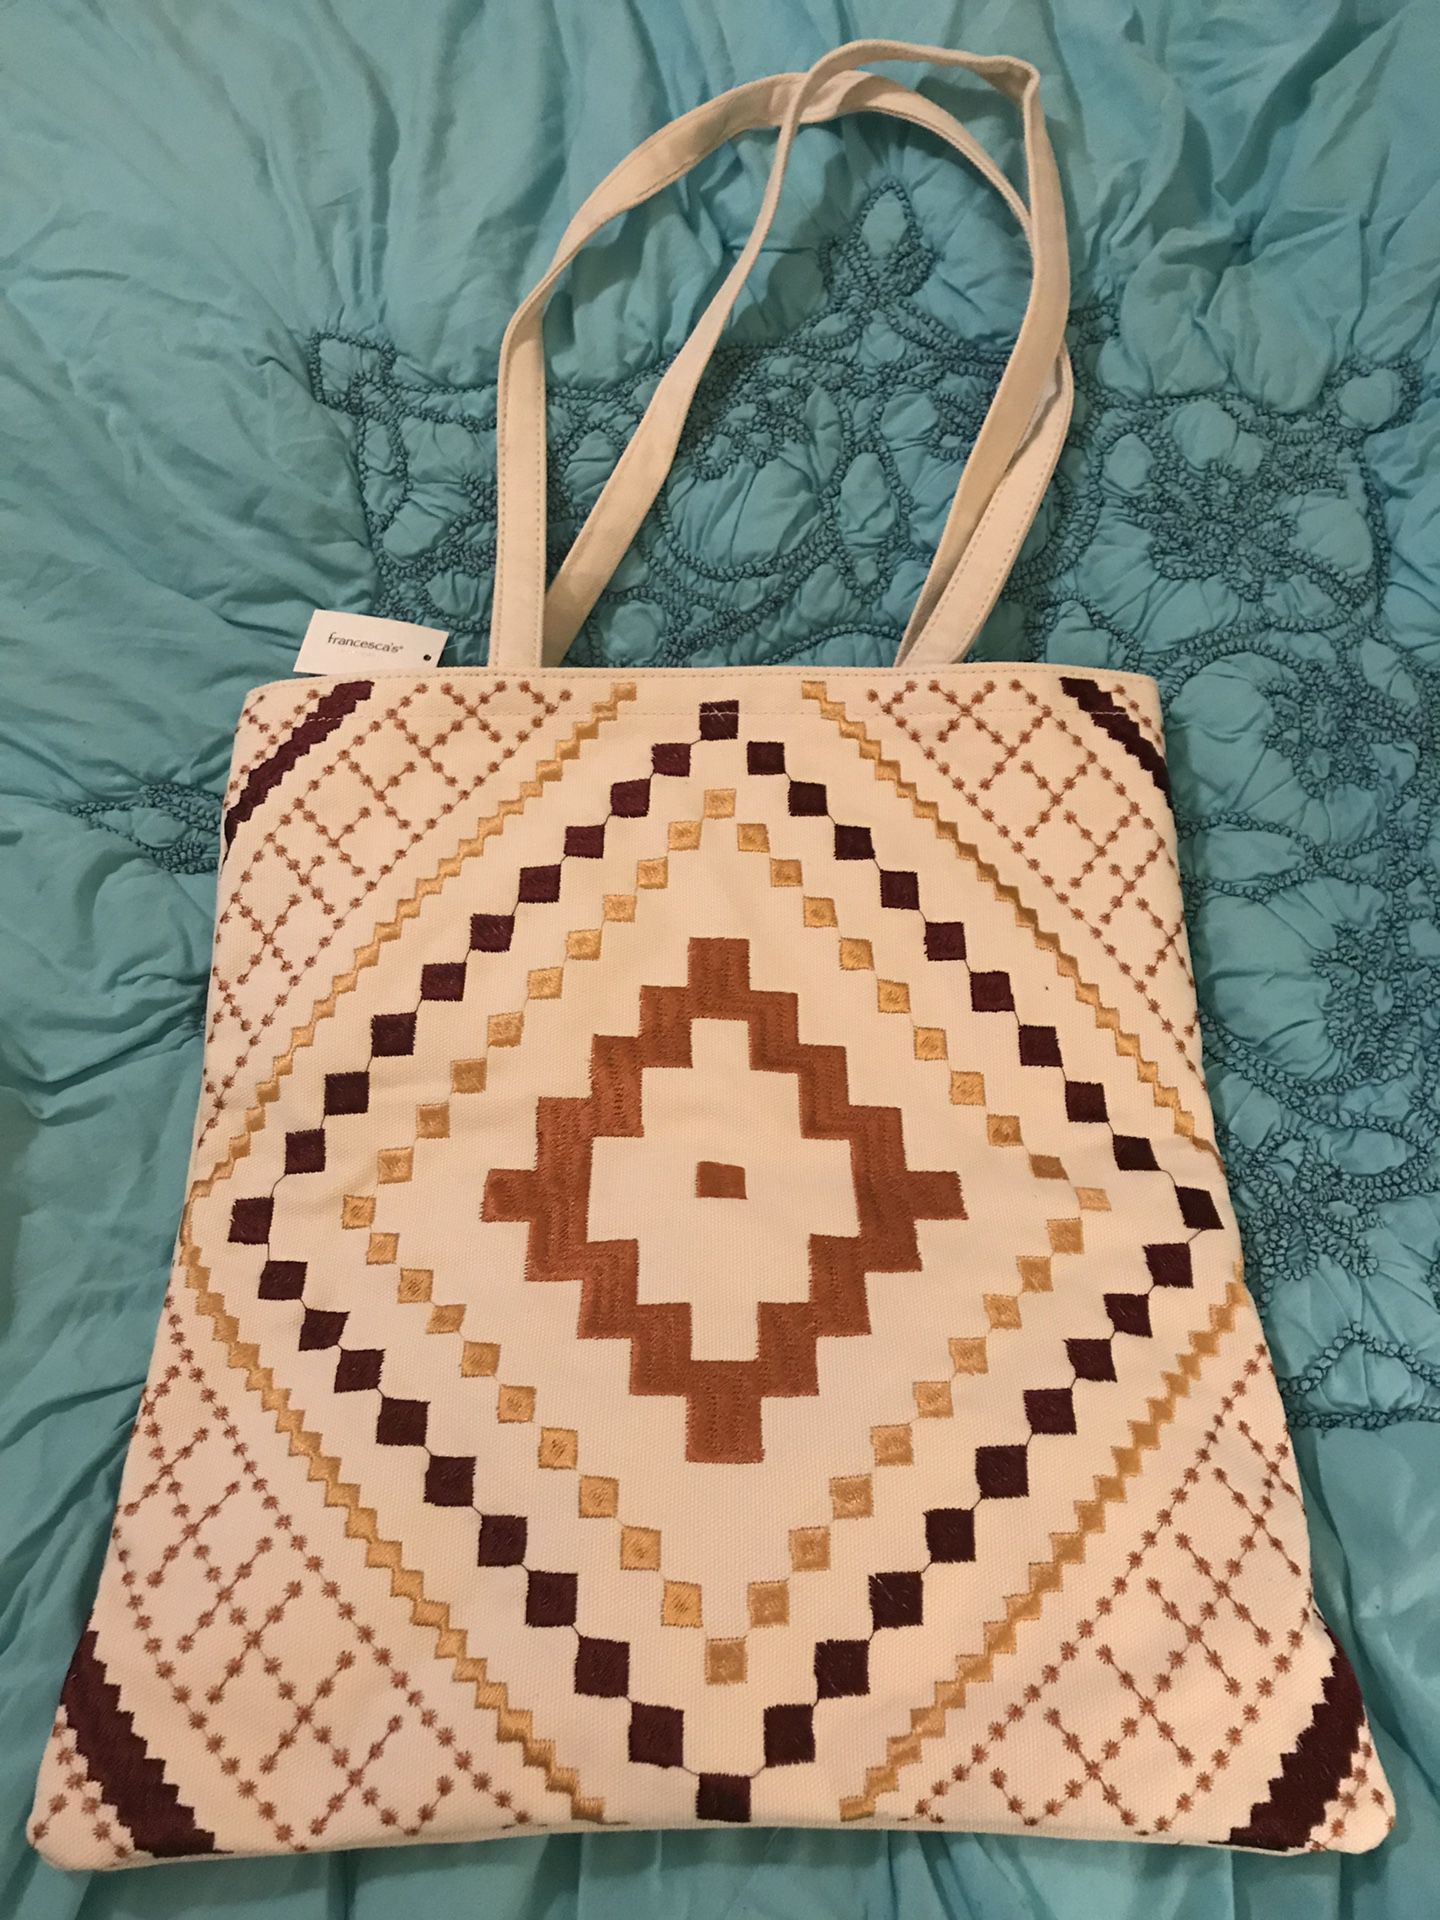 Brand new Inka tote, over the shoulders sturdy straps